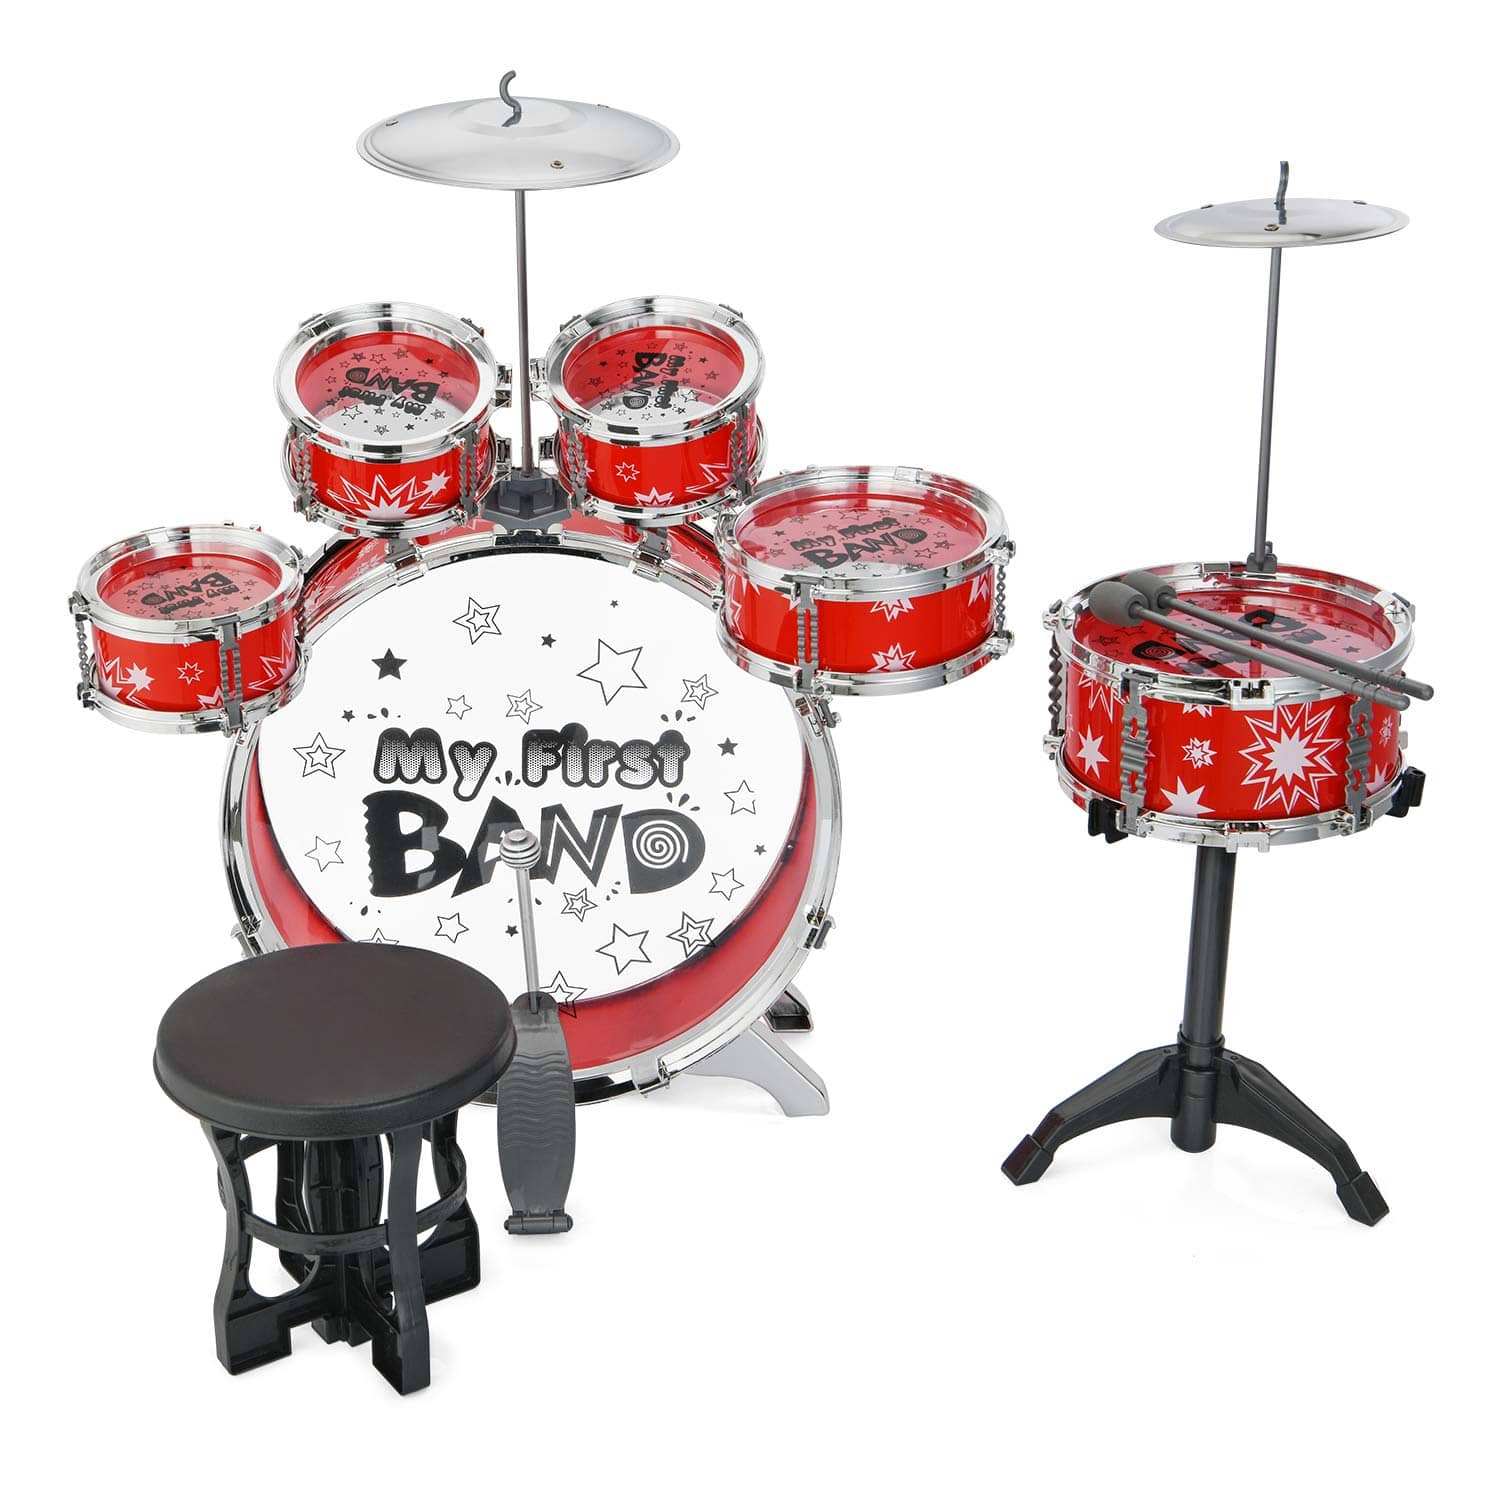 Reditmo Kids Jazz Drum Set, 6 Drums, 2 Cymbals, Chair, Kick Pedal, 2 Drumsticks, Stool, Early Education Musical Instrument to Develop Children’s Creativity, Red 8